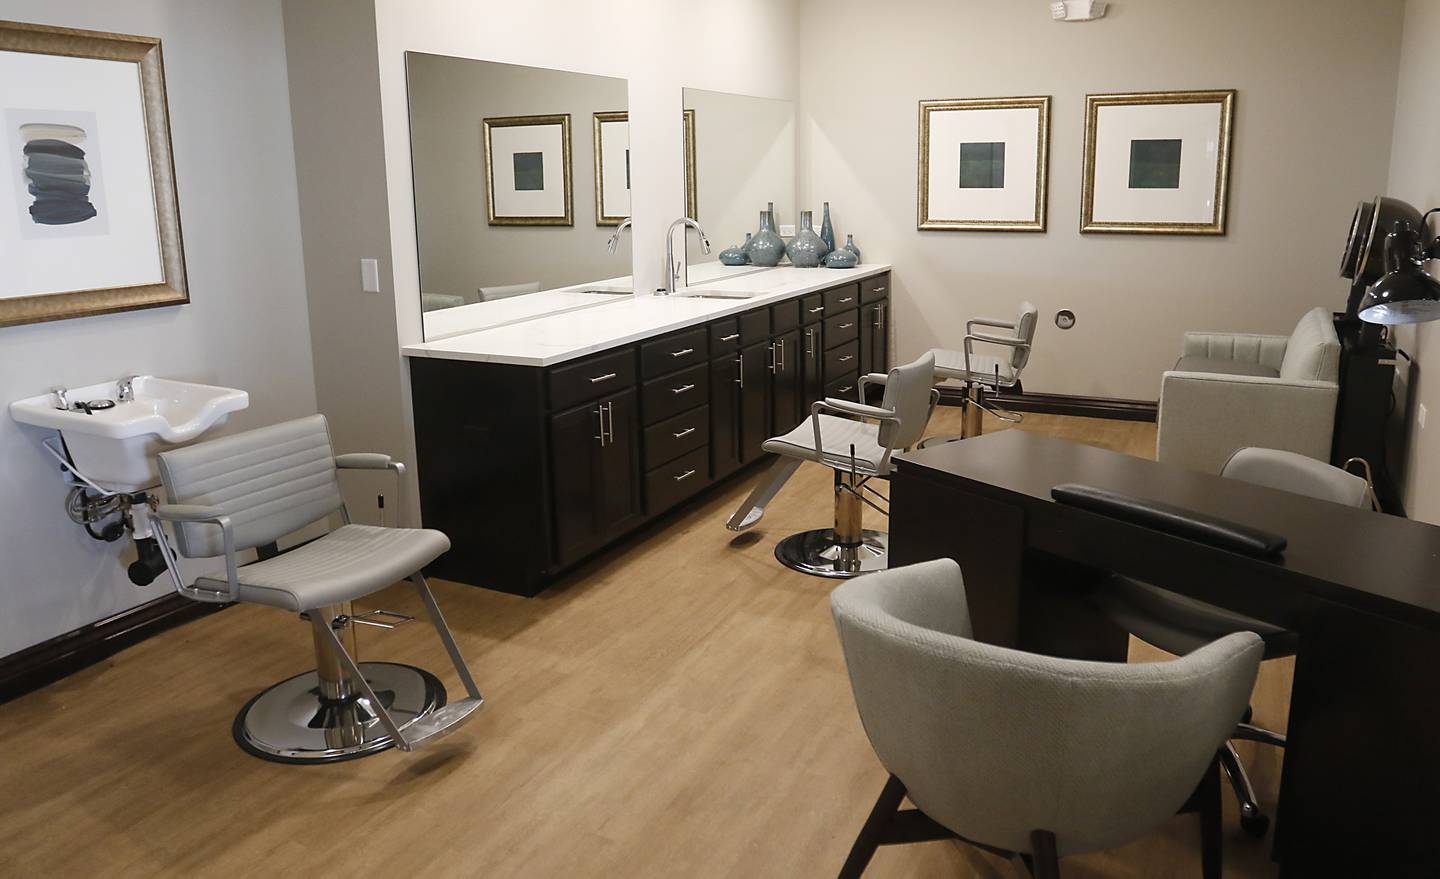 A salon in the new Cedarhurst assisted living center on Thursday, Aug. 4, 2022. The center at 10511 Route 14, in Woodstock, is scheduled to opening later this month.